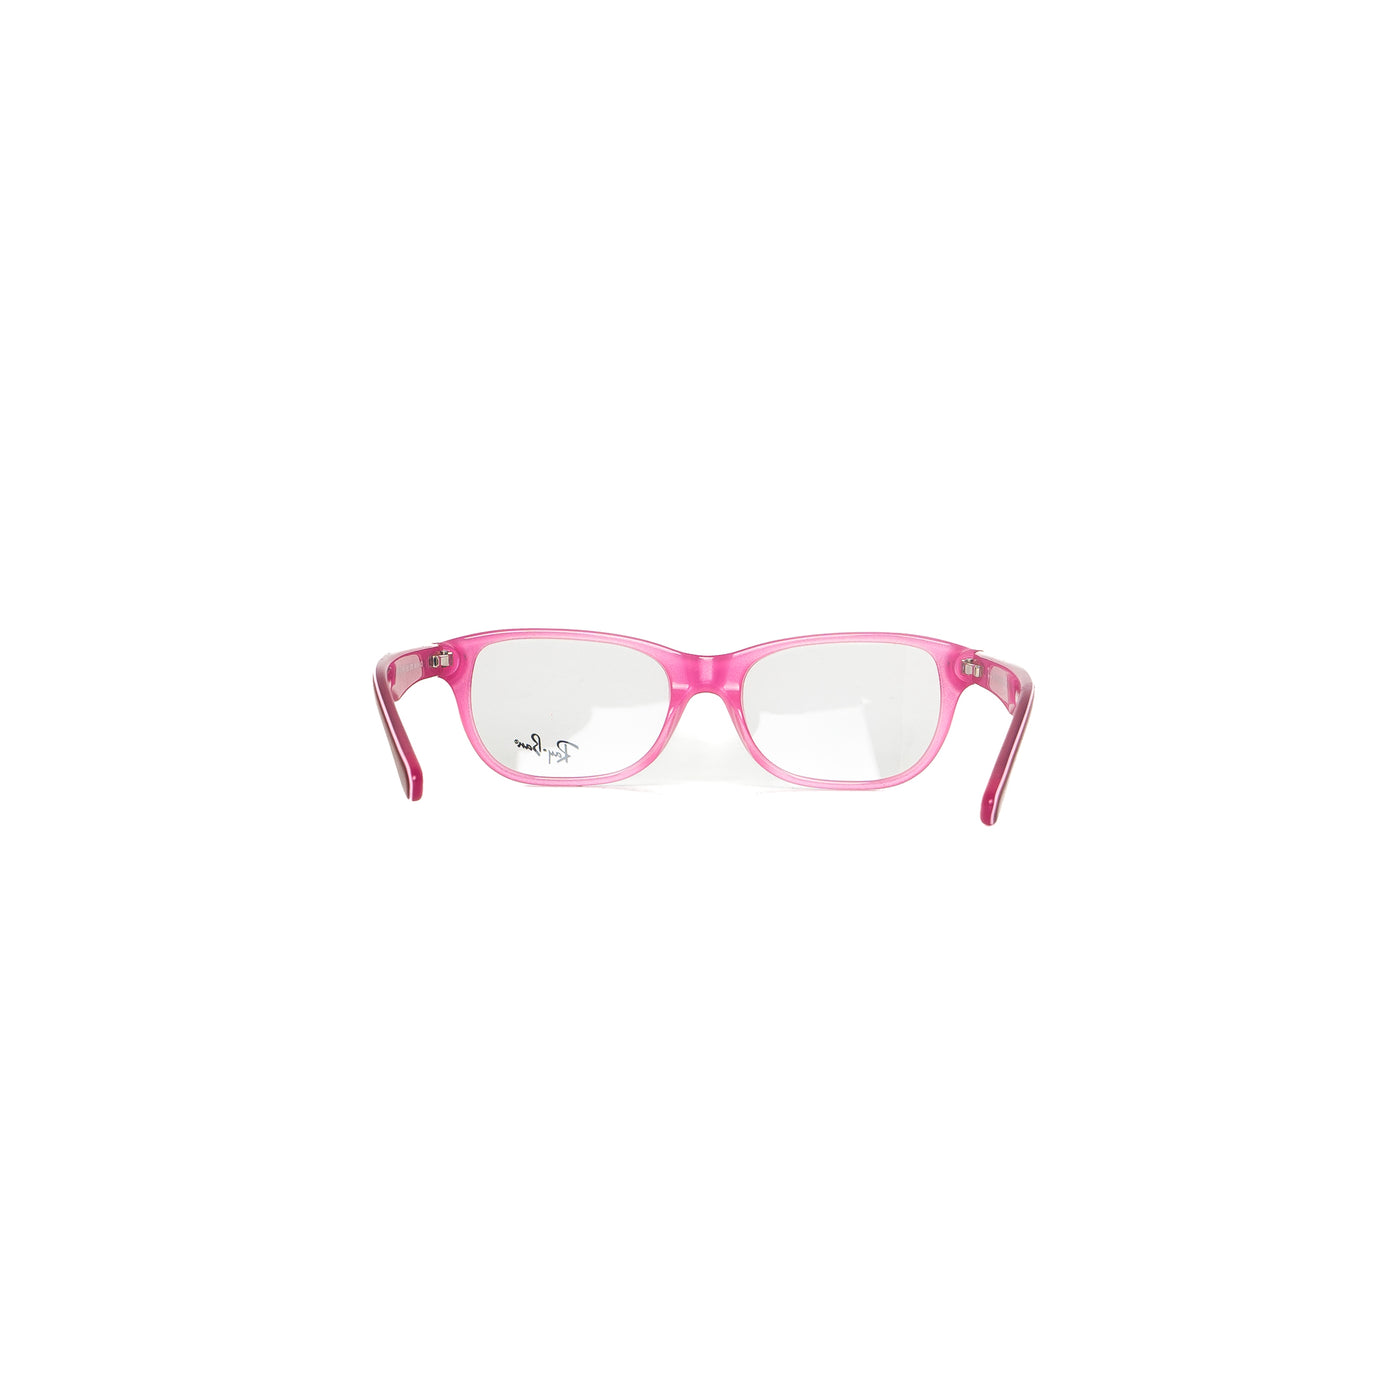 Ray-Ban Eyeglasses for Kids | RY1555376148 - Vision Express Optical Philippines